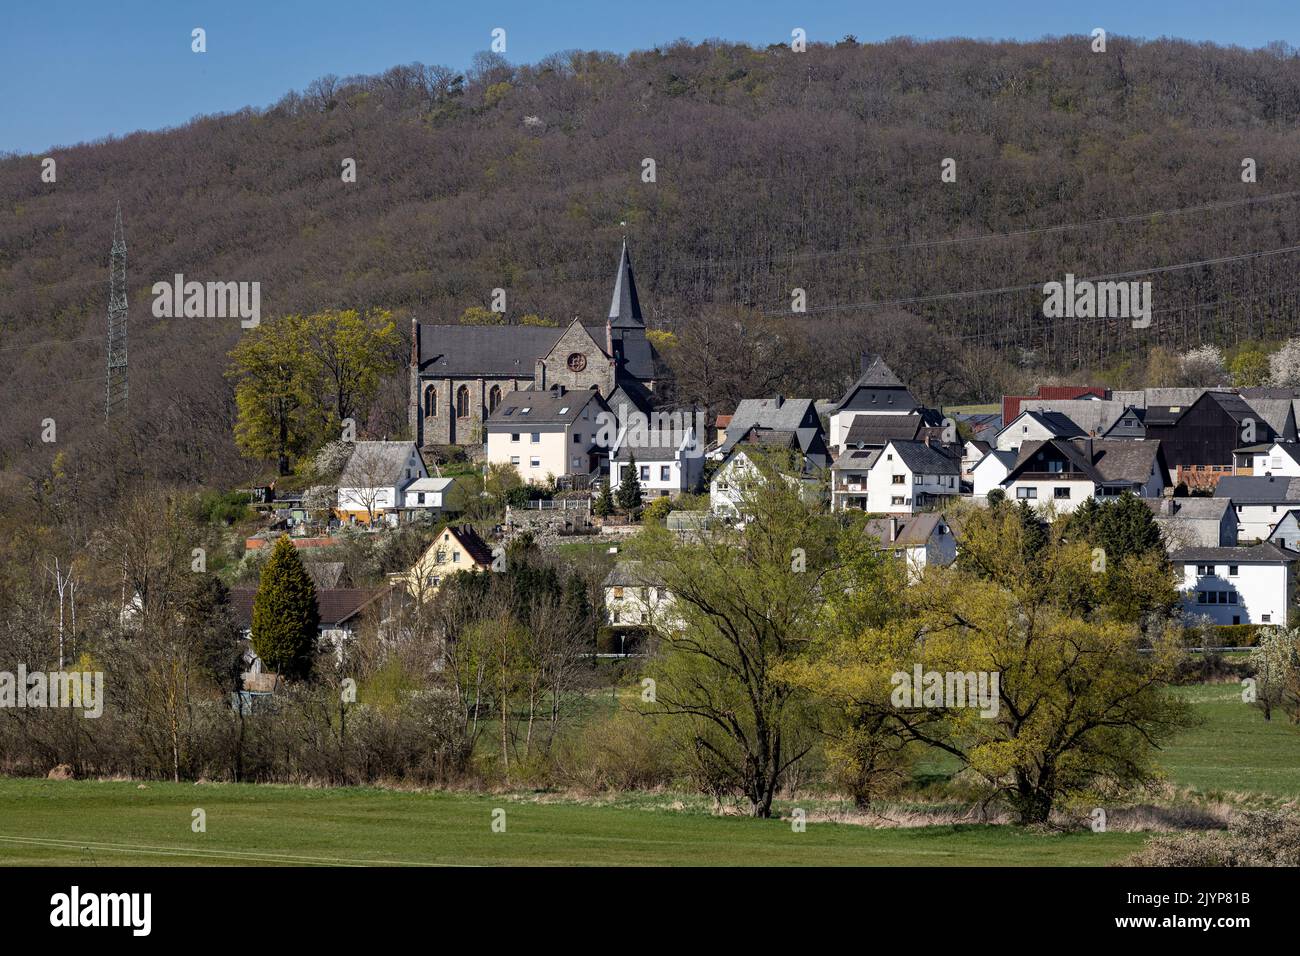 Dillheim, former village, with protestant neo-gothic Jesus Christ Church, since 1970 local district of municipality Ehringshausen, Hesse, Germany Stock Photo